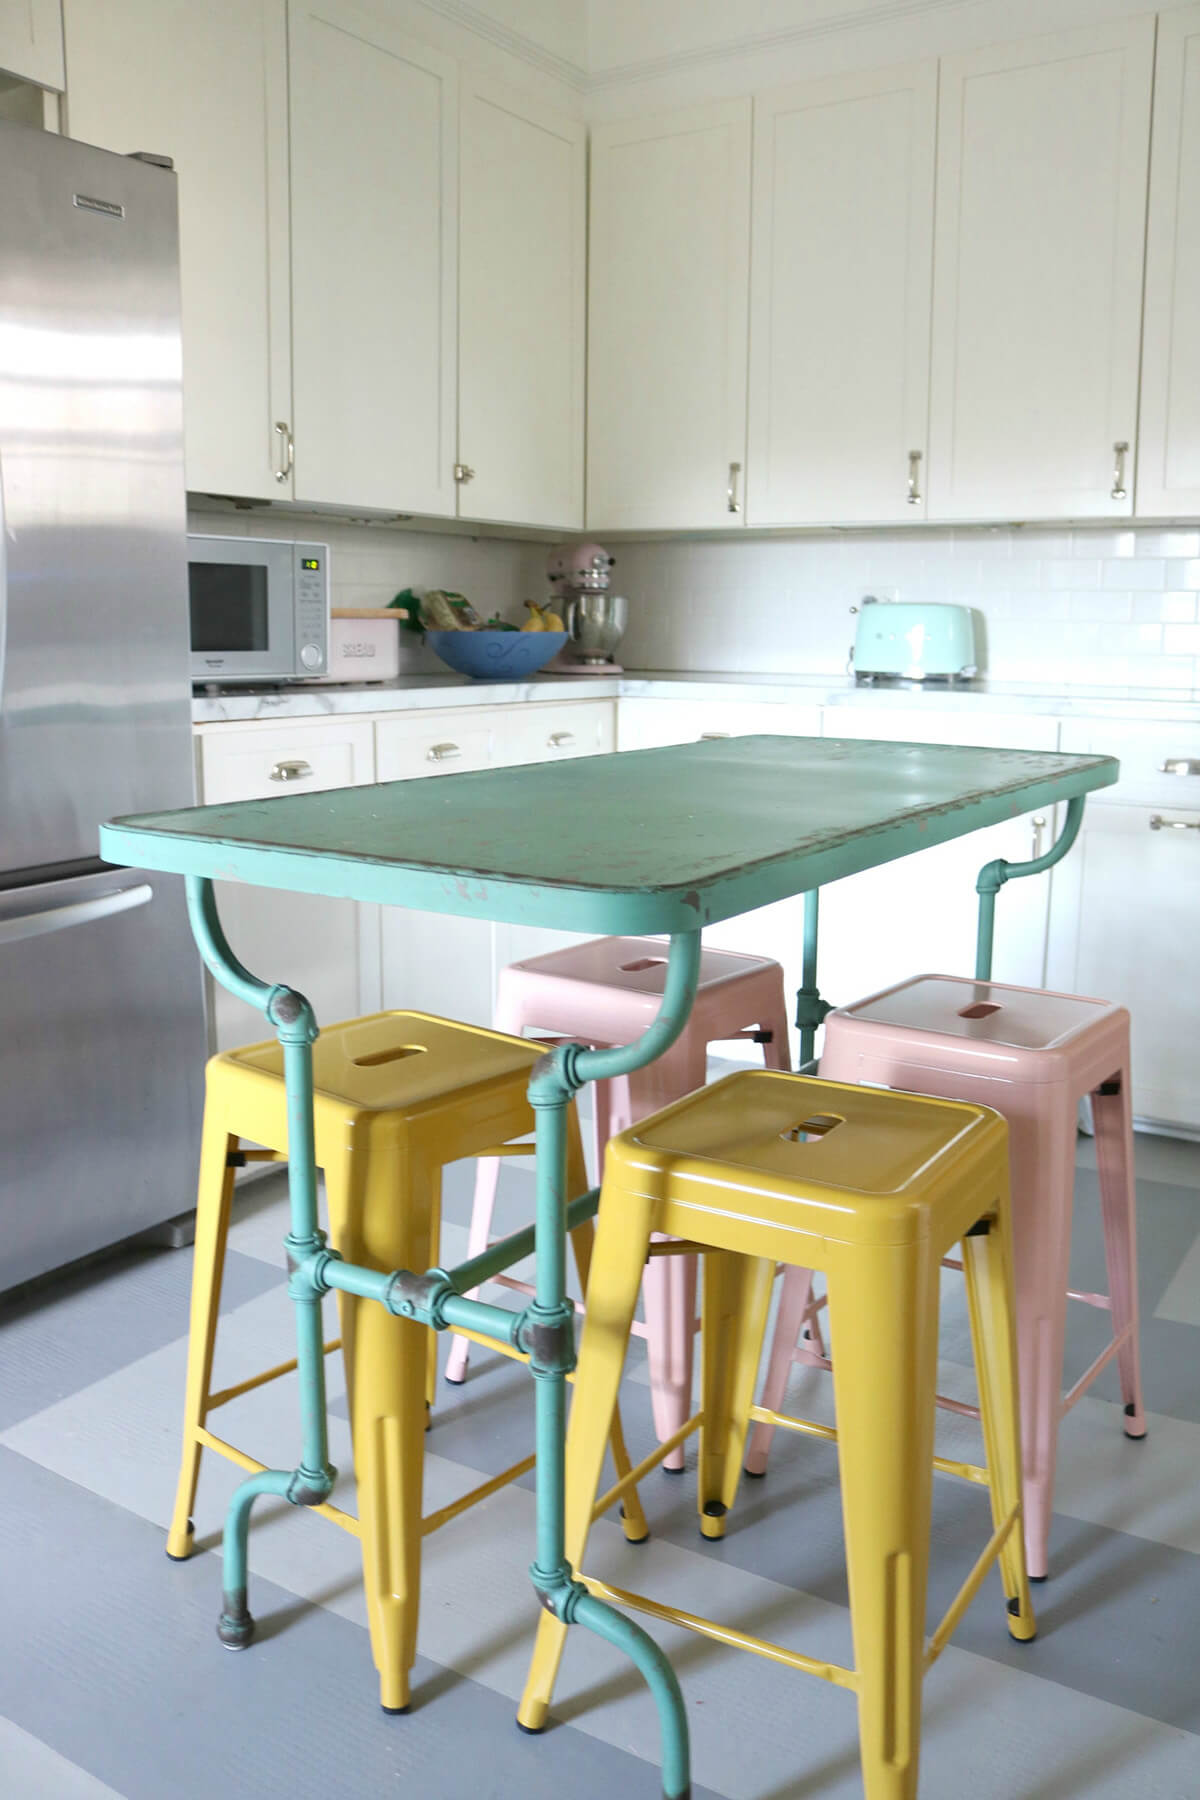 Kitchen with Repurposed Multi-Colored Island Seating